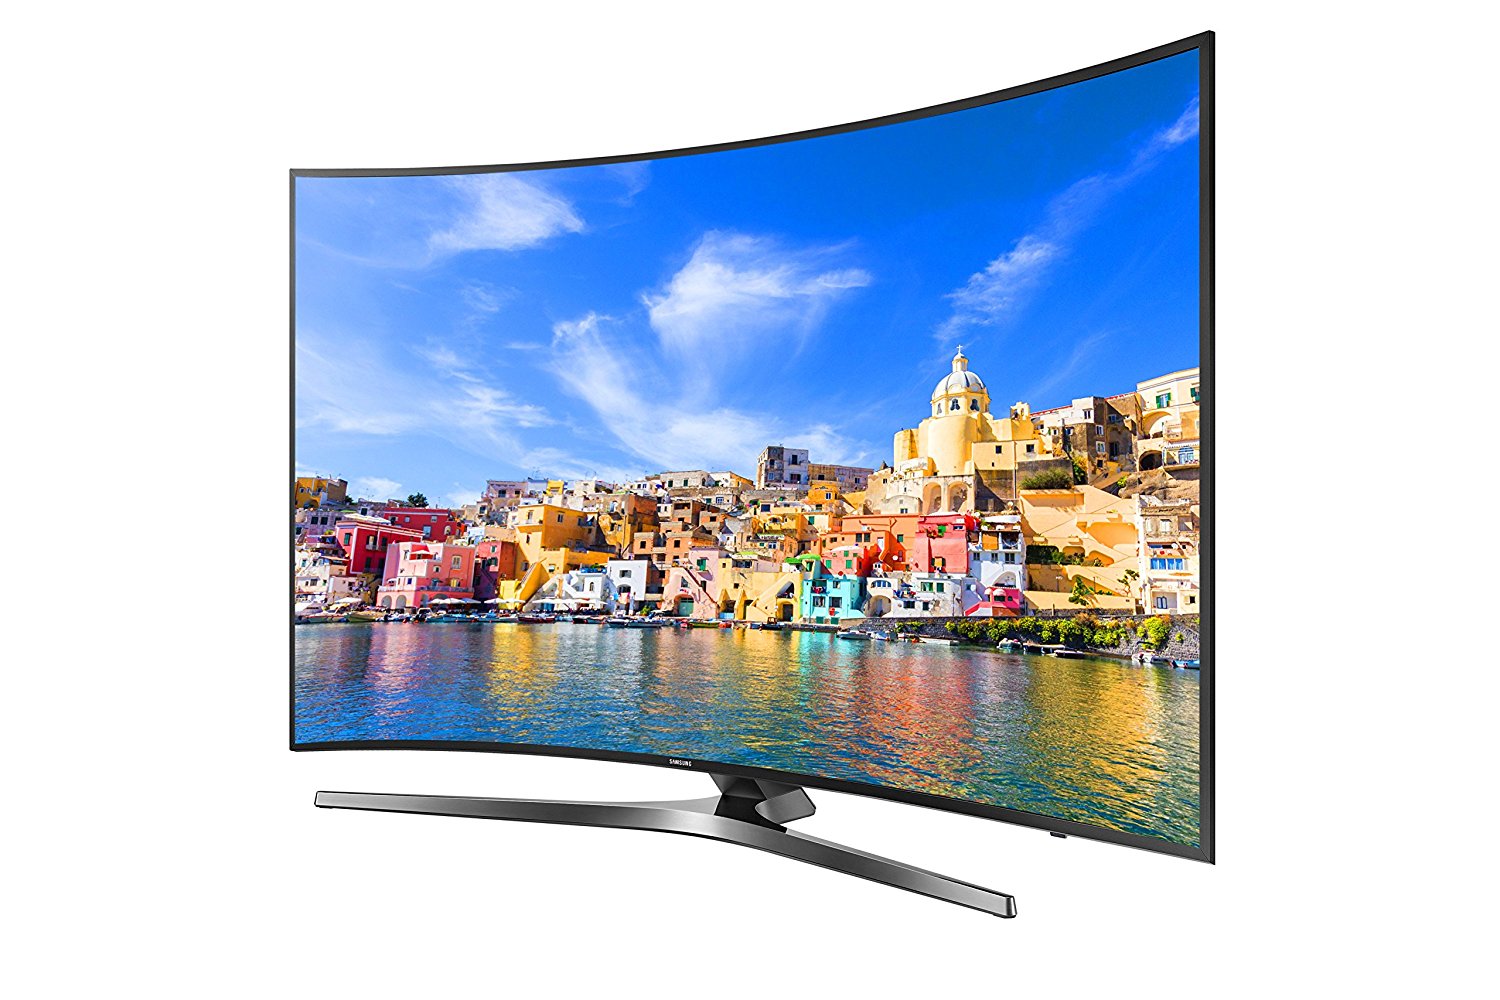 Samsung 4k Curved LED TV-Curved-View